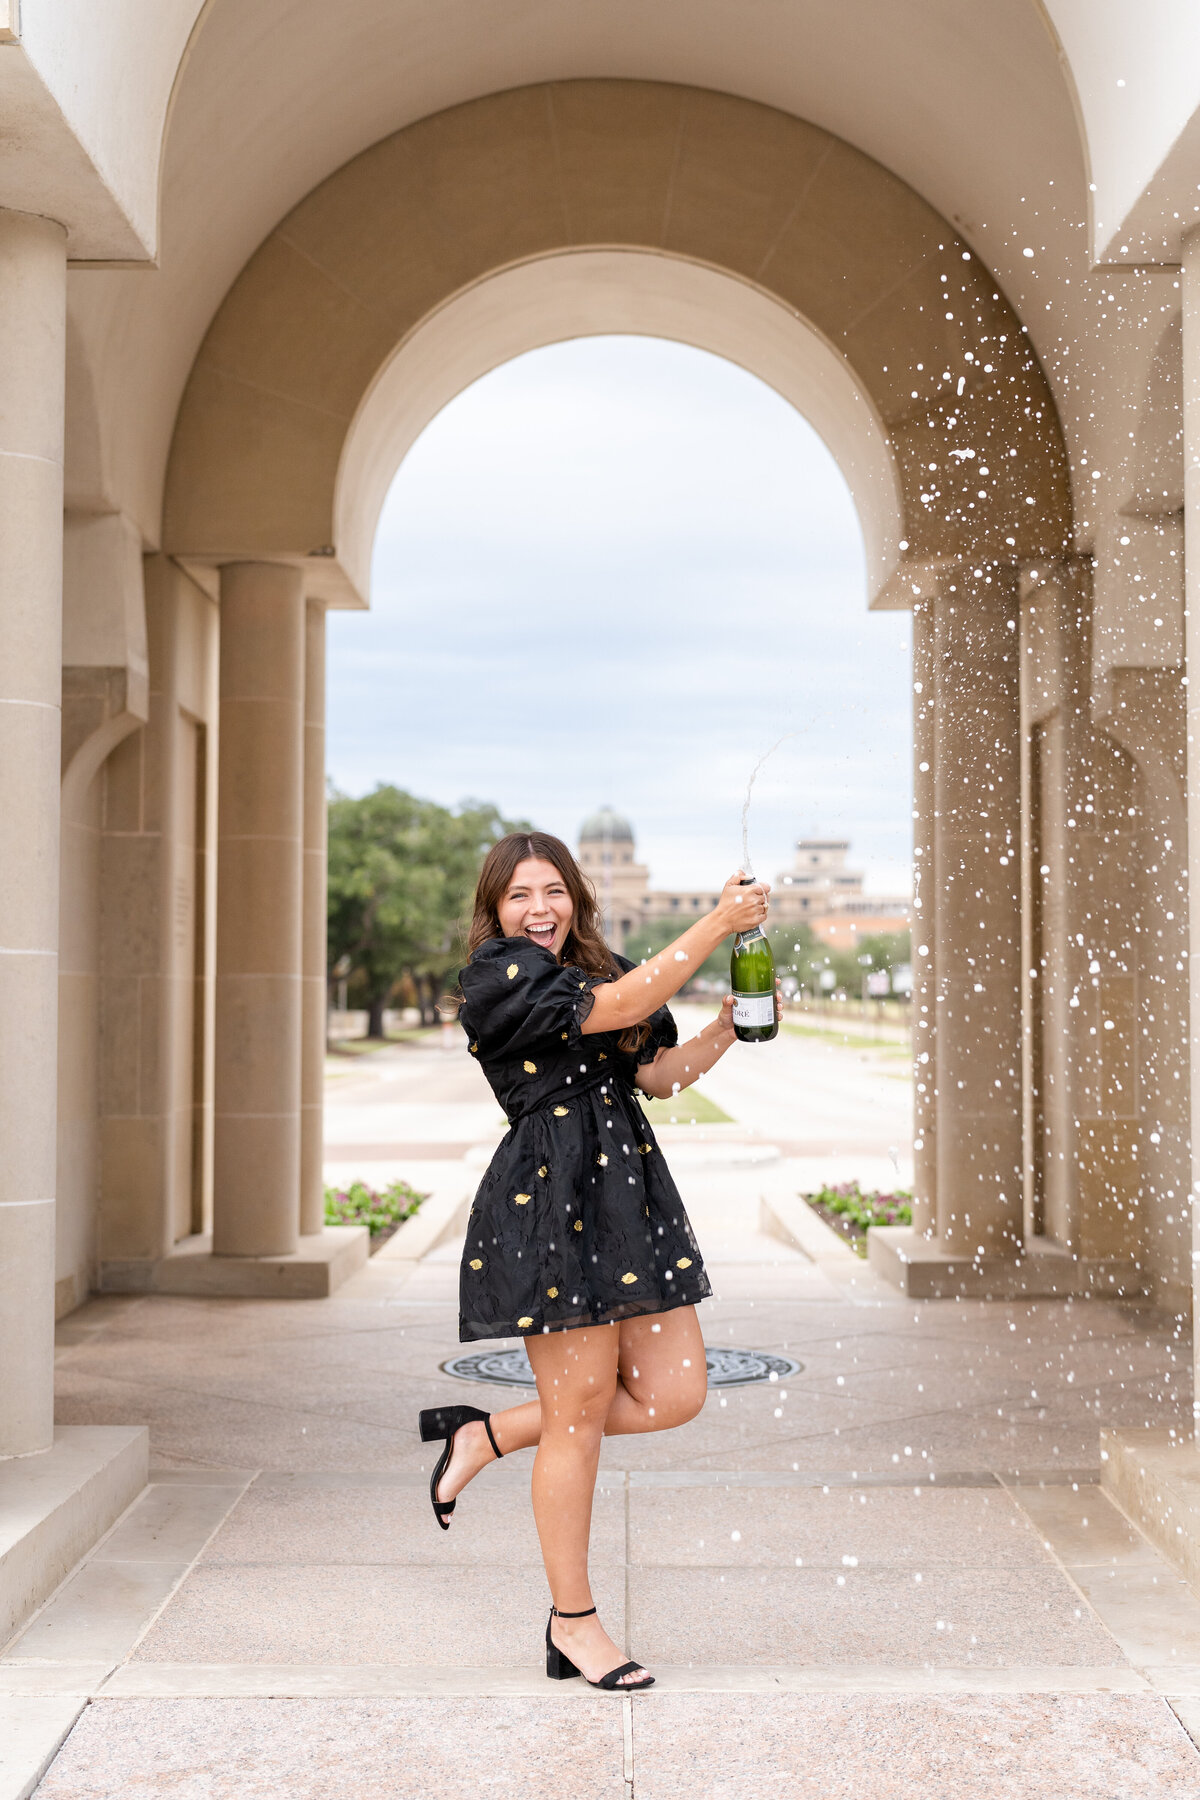 Texas A&M senior girl wearing short black dress and heels spraying champagne and celebrating in the archways of the Bell Tower